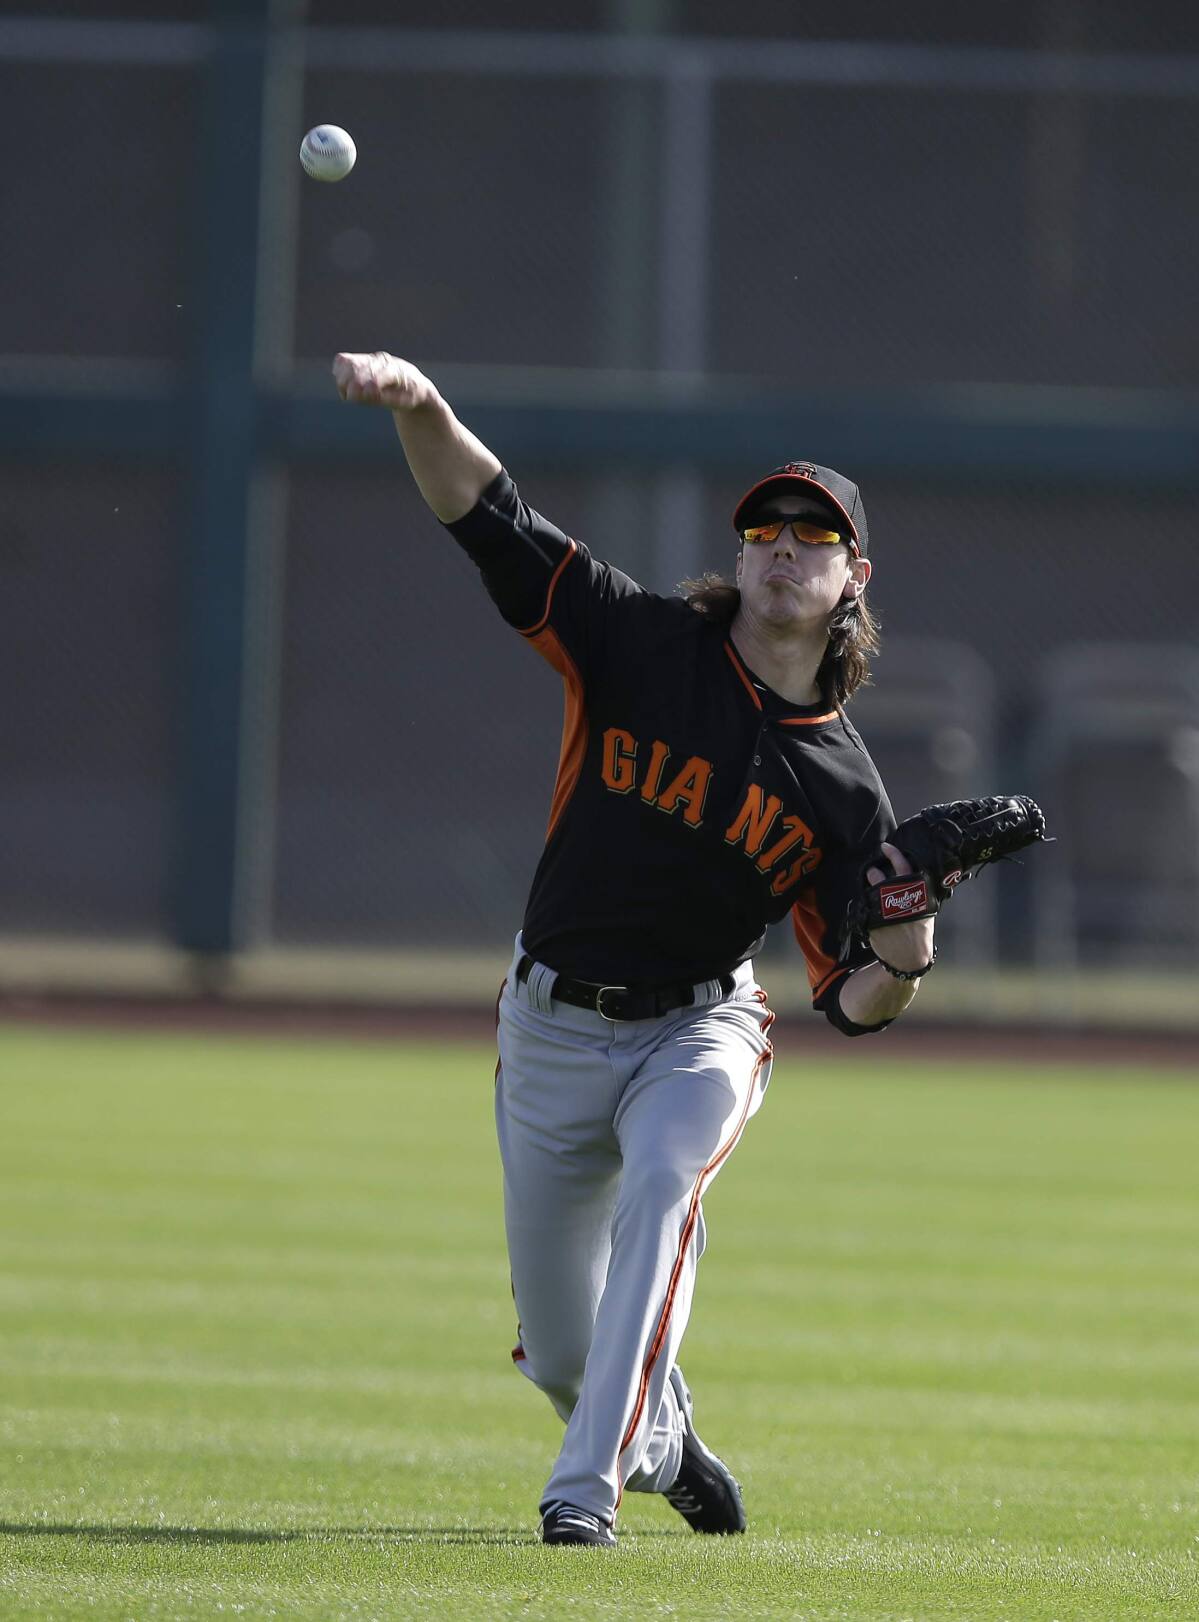 Former Giants ace Tim Lincecum turns to dad, lets hair grow out, in an  effort to regain form